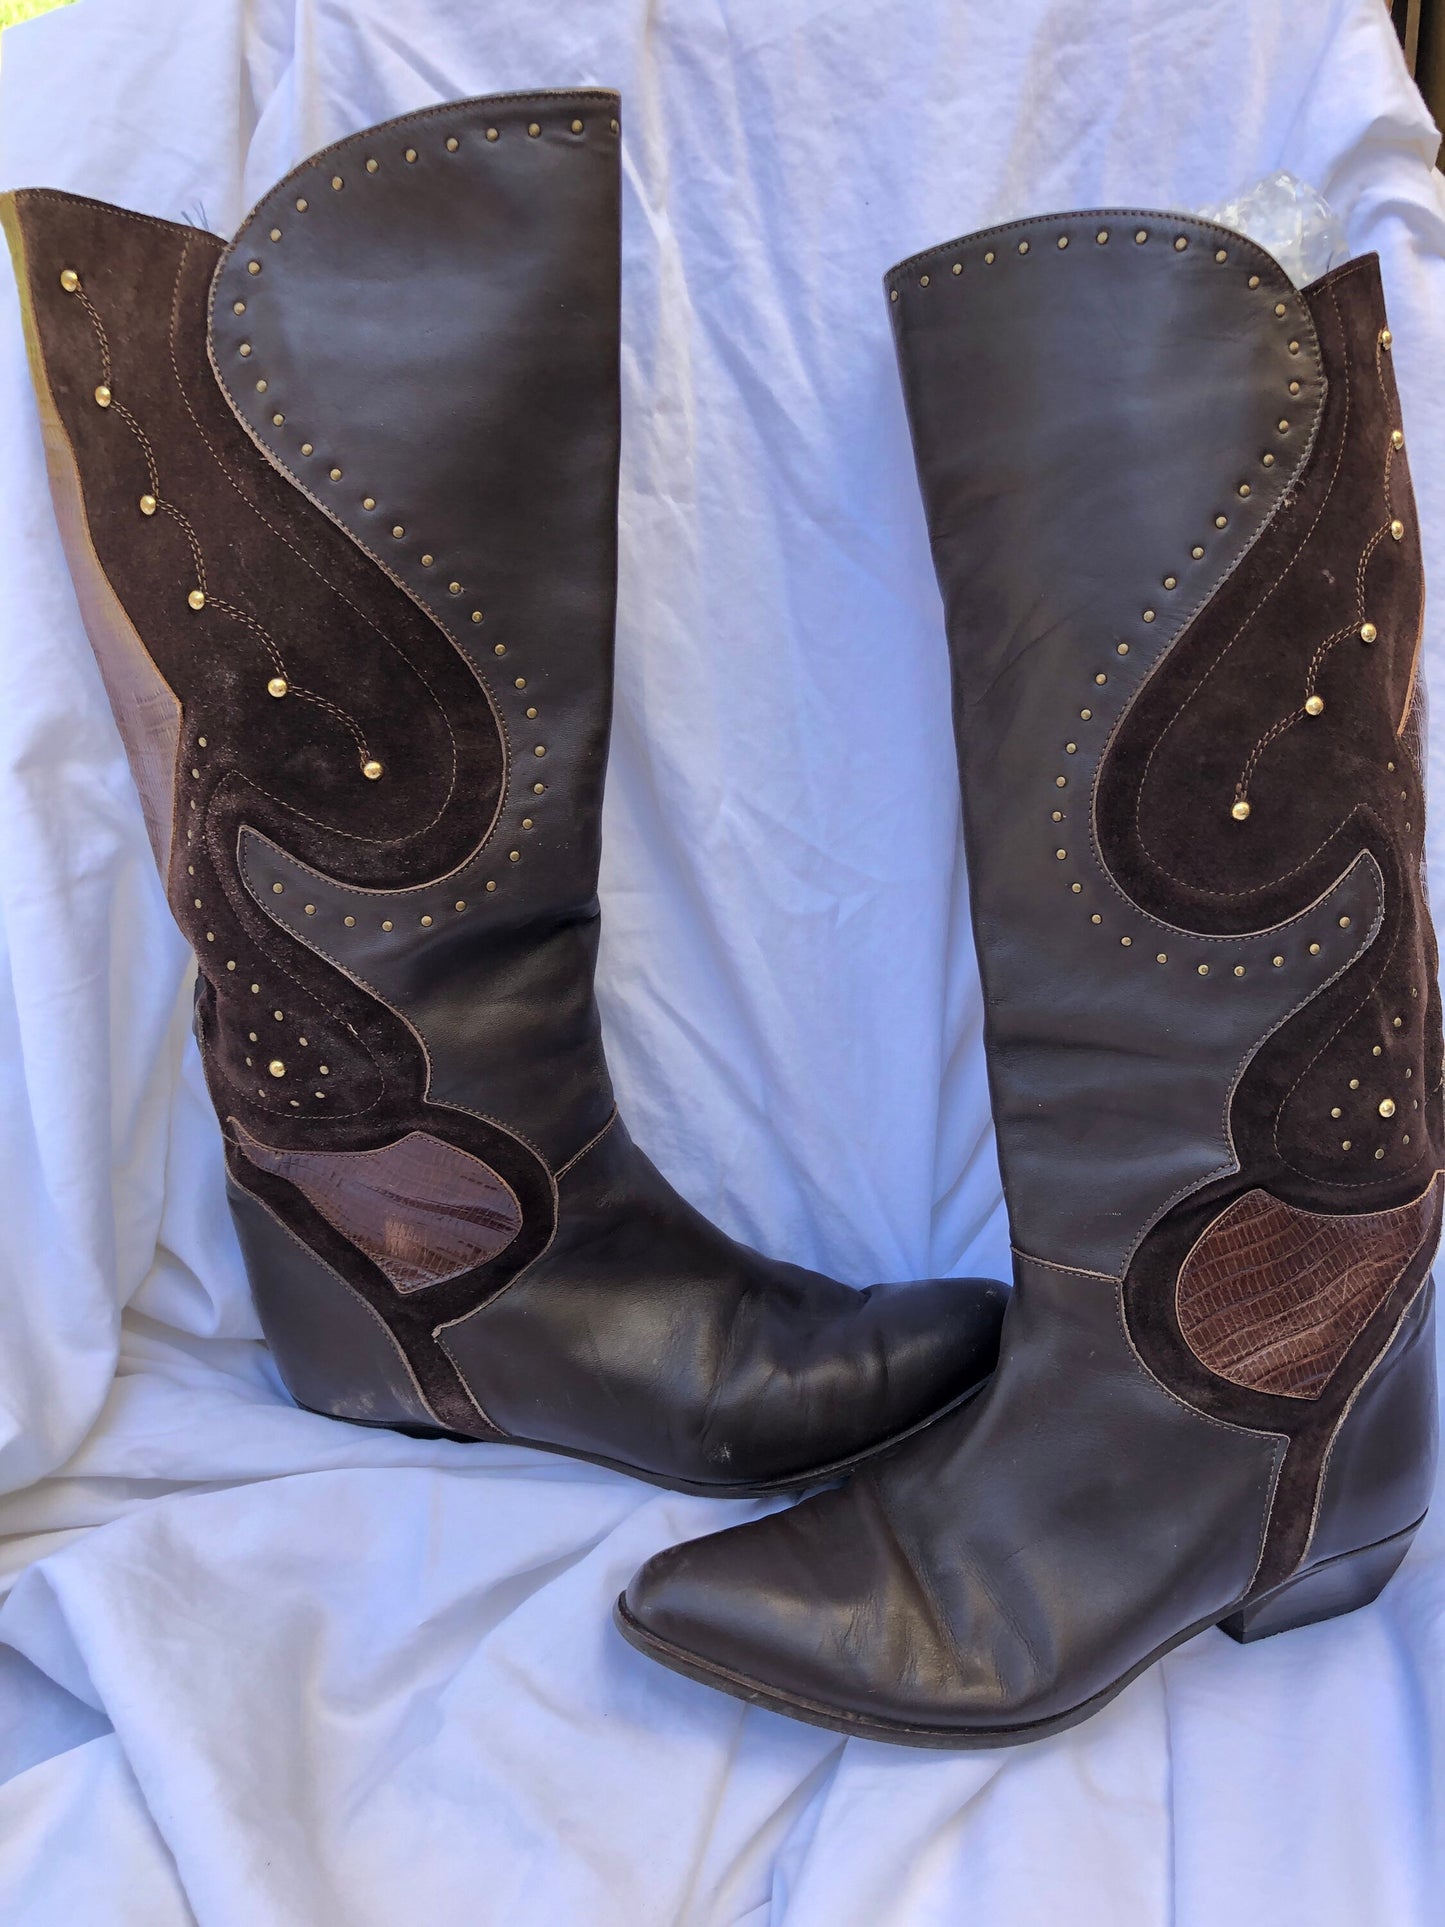 Vintage Italian Brown Leather & Suede Boots with Brass Rivet Details Size 8 1/2